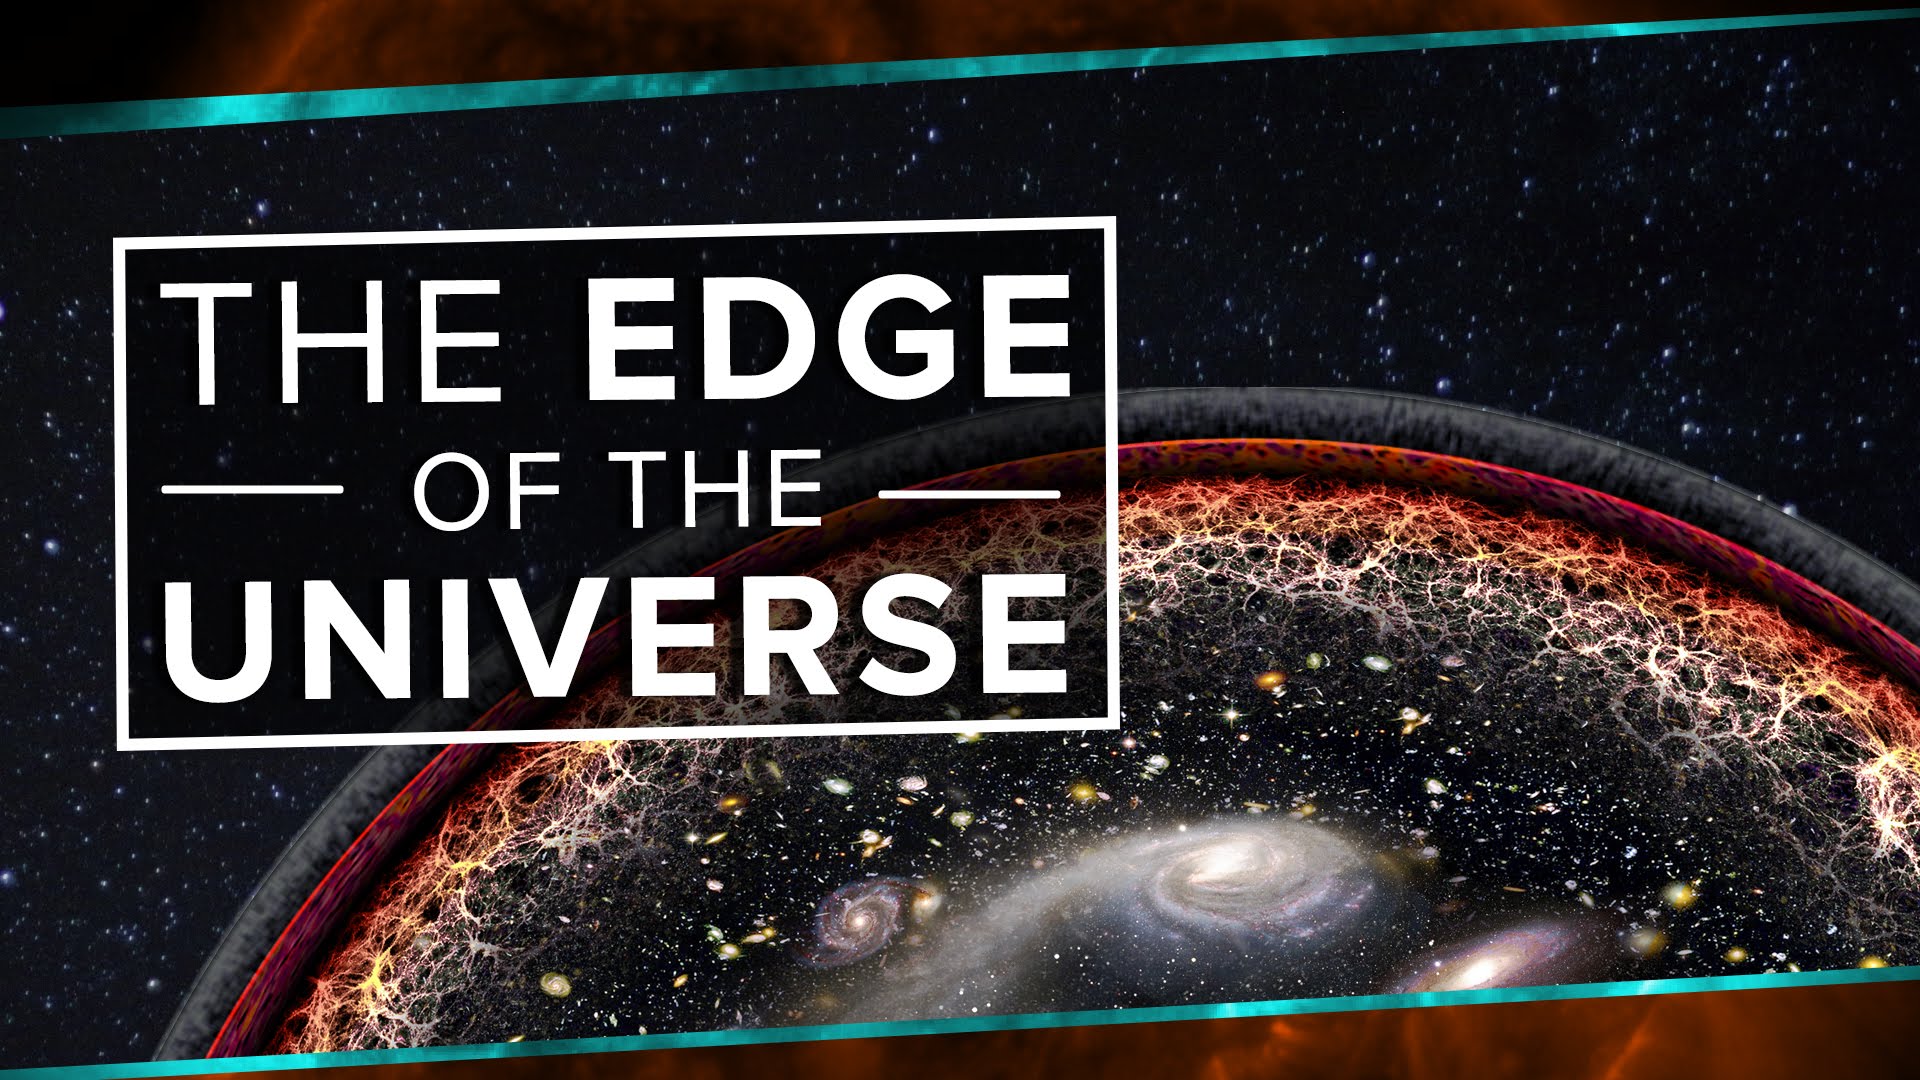 What Happens At The Edge Of The Universe?